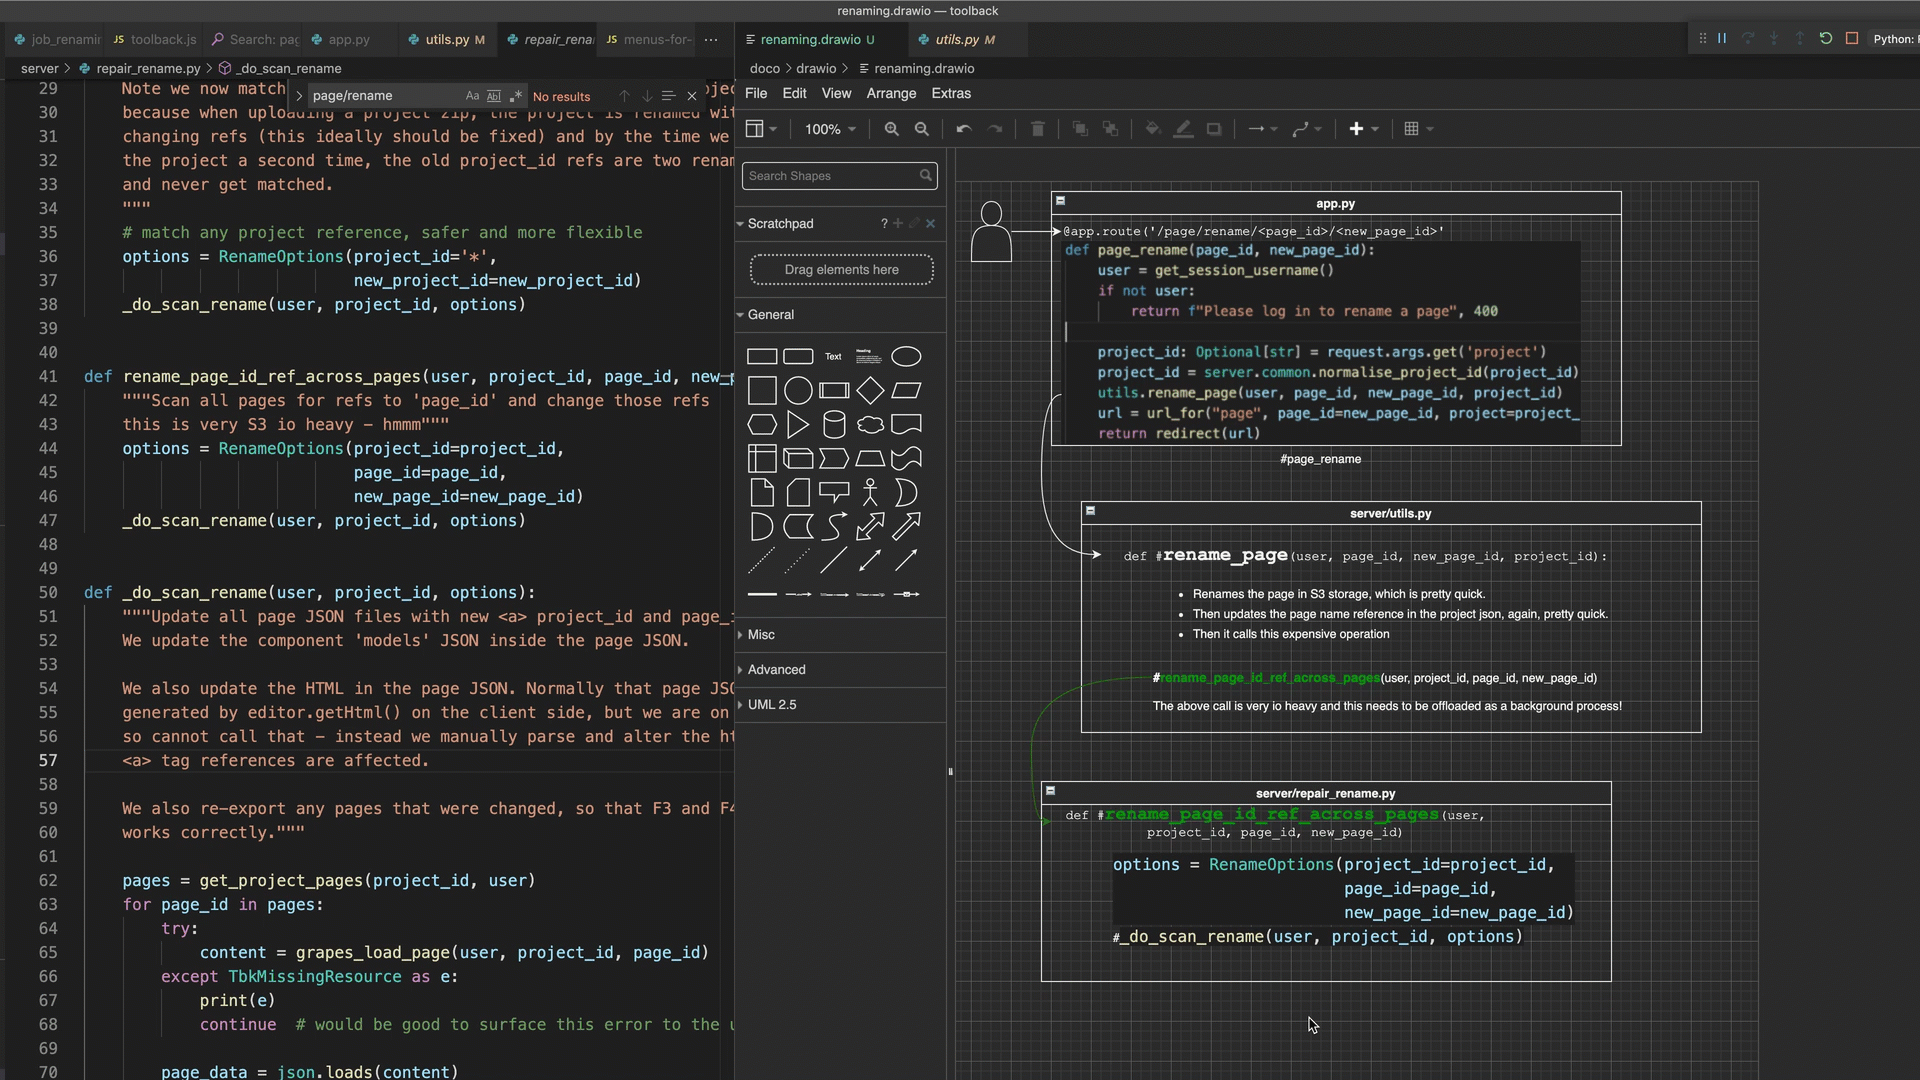 literate-drawio-vscode-01 - image ref which works on main github page